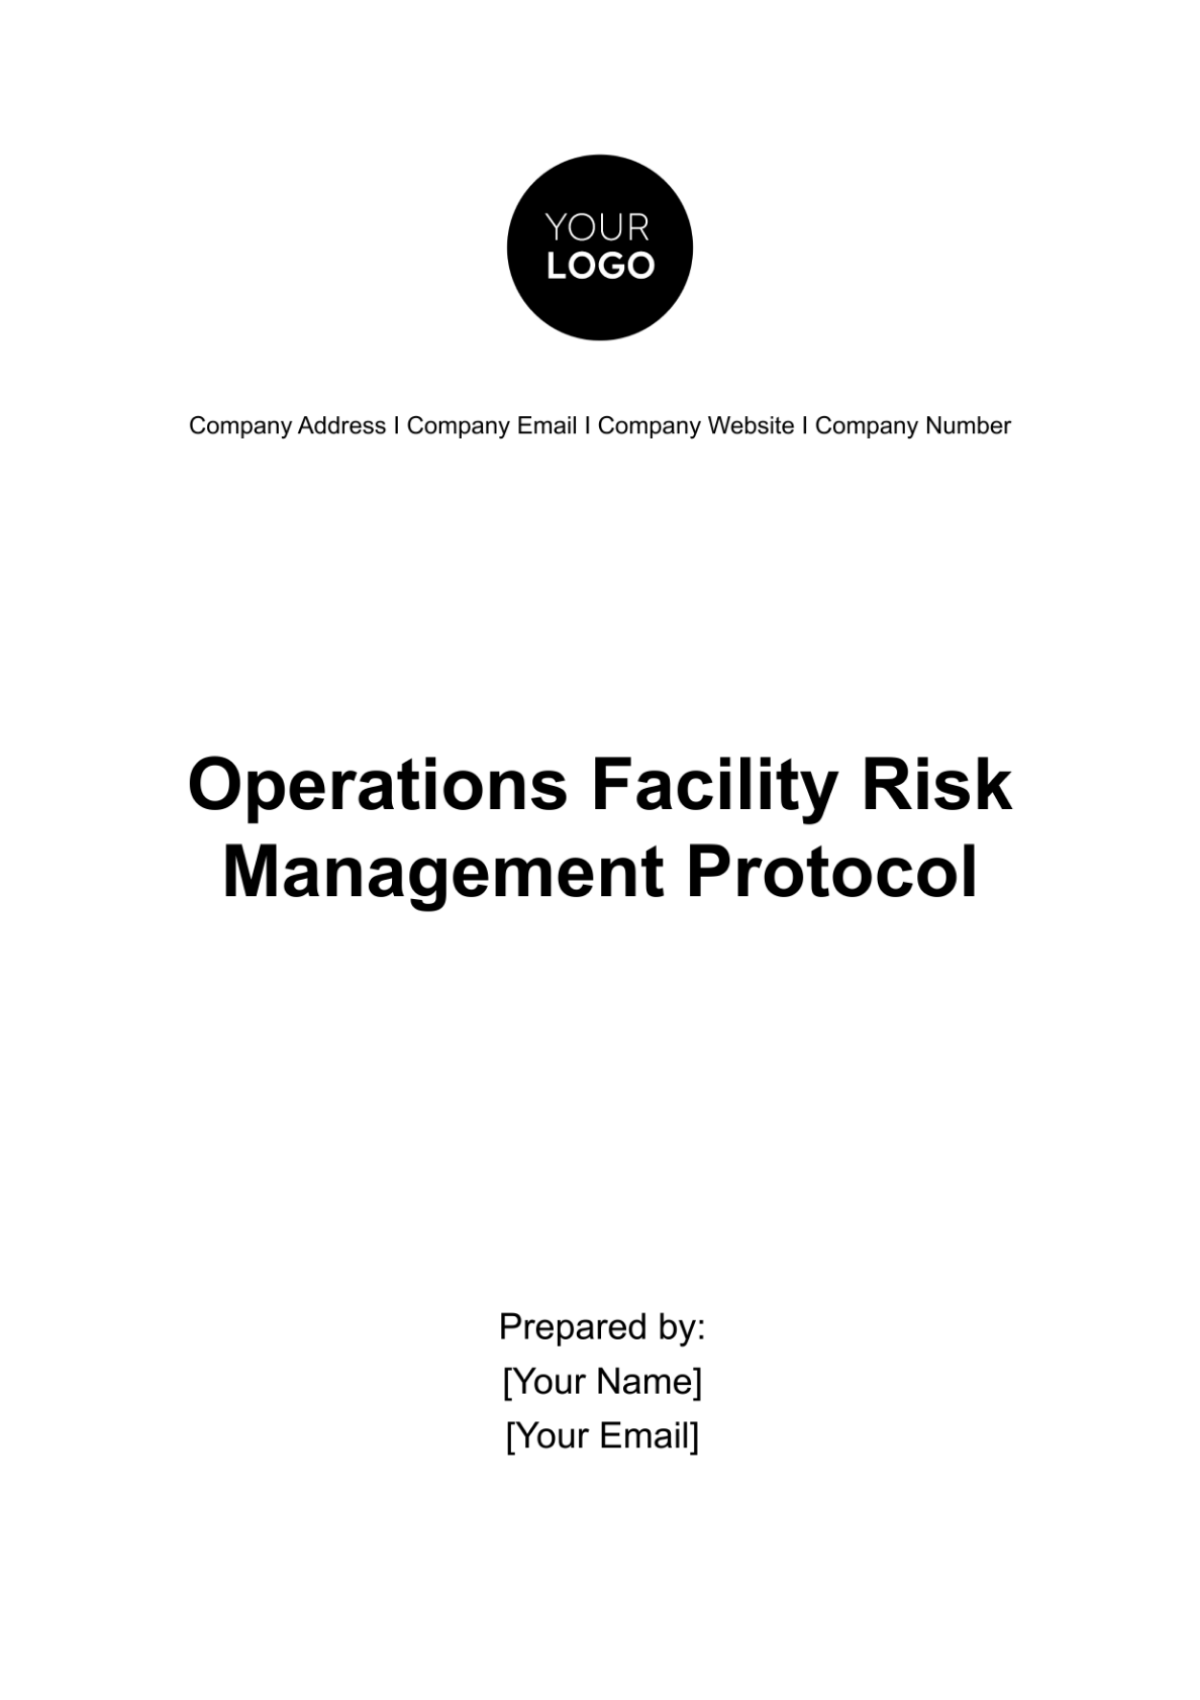 Operations Facility Risk Management Protocol Template